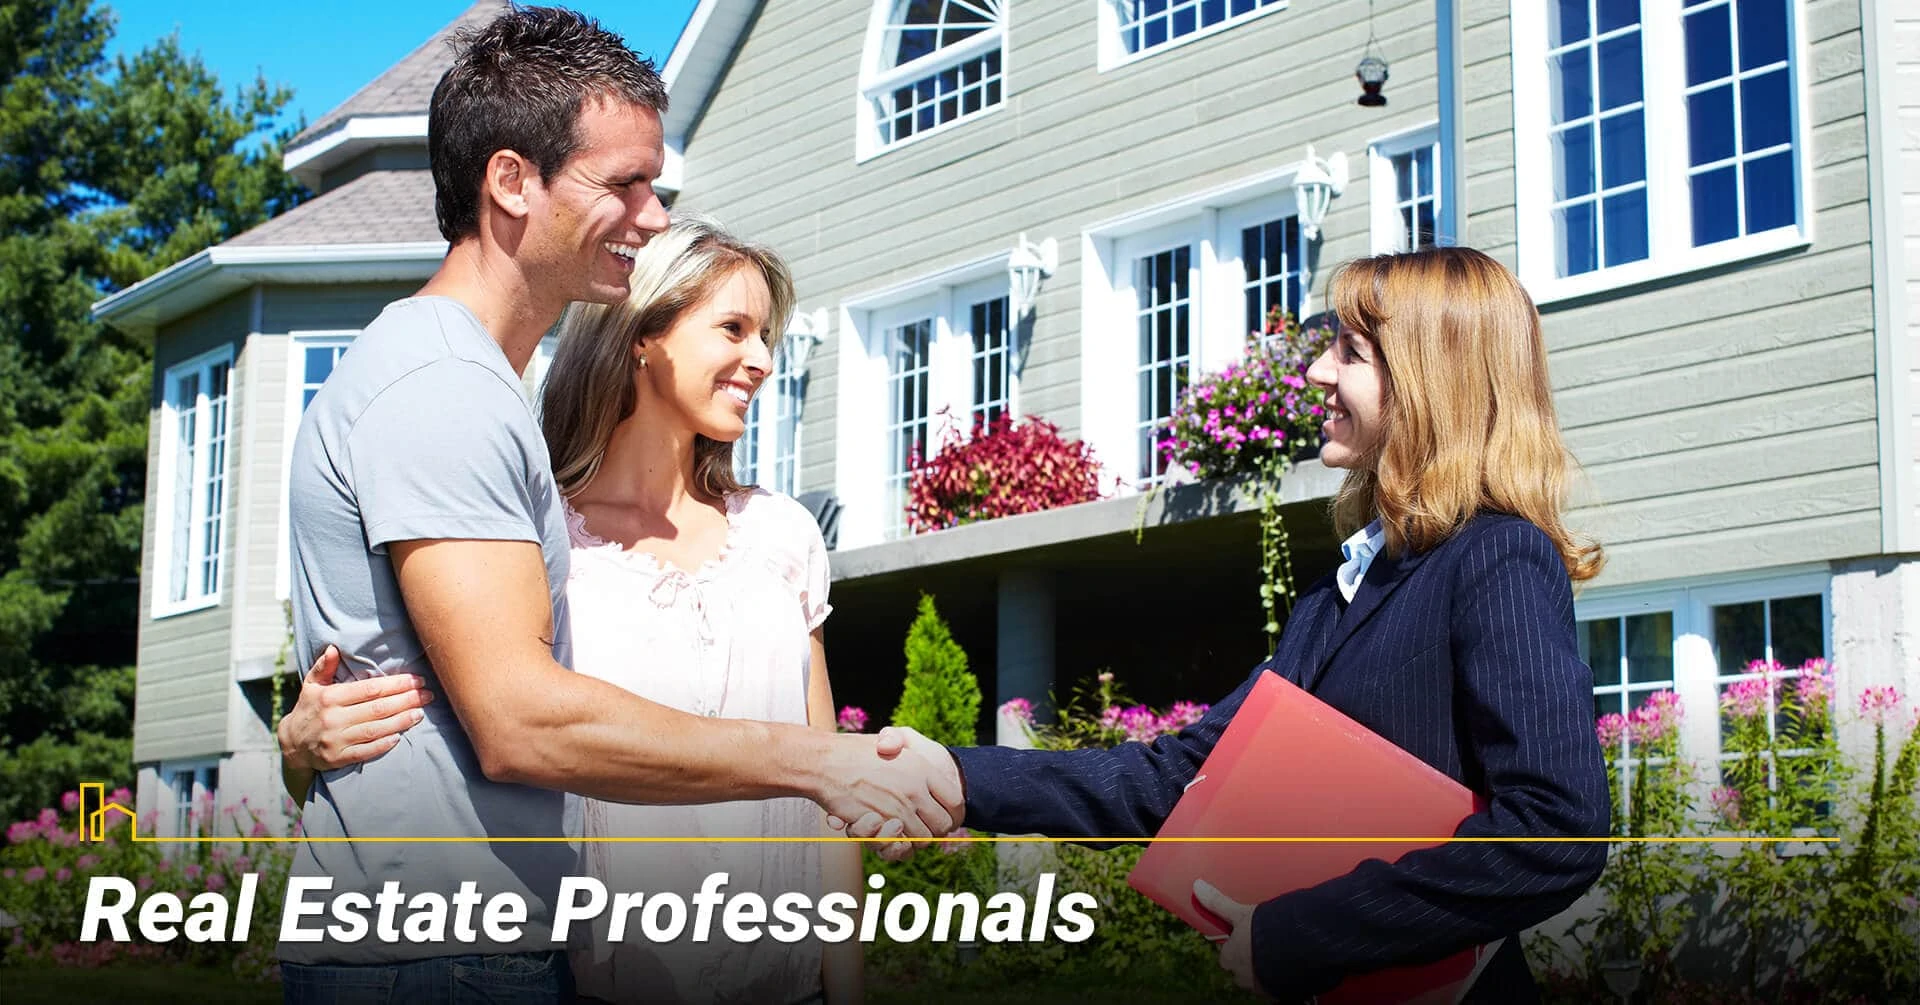 Real Estate Professionals, take advice from your real estate agent